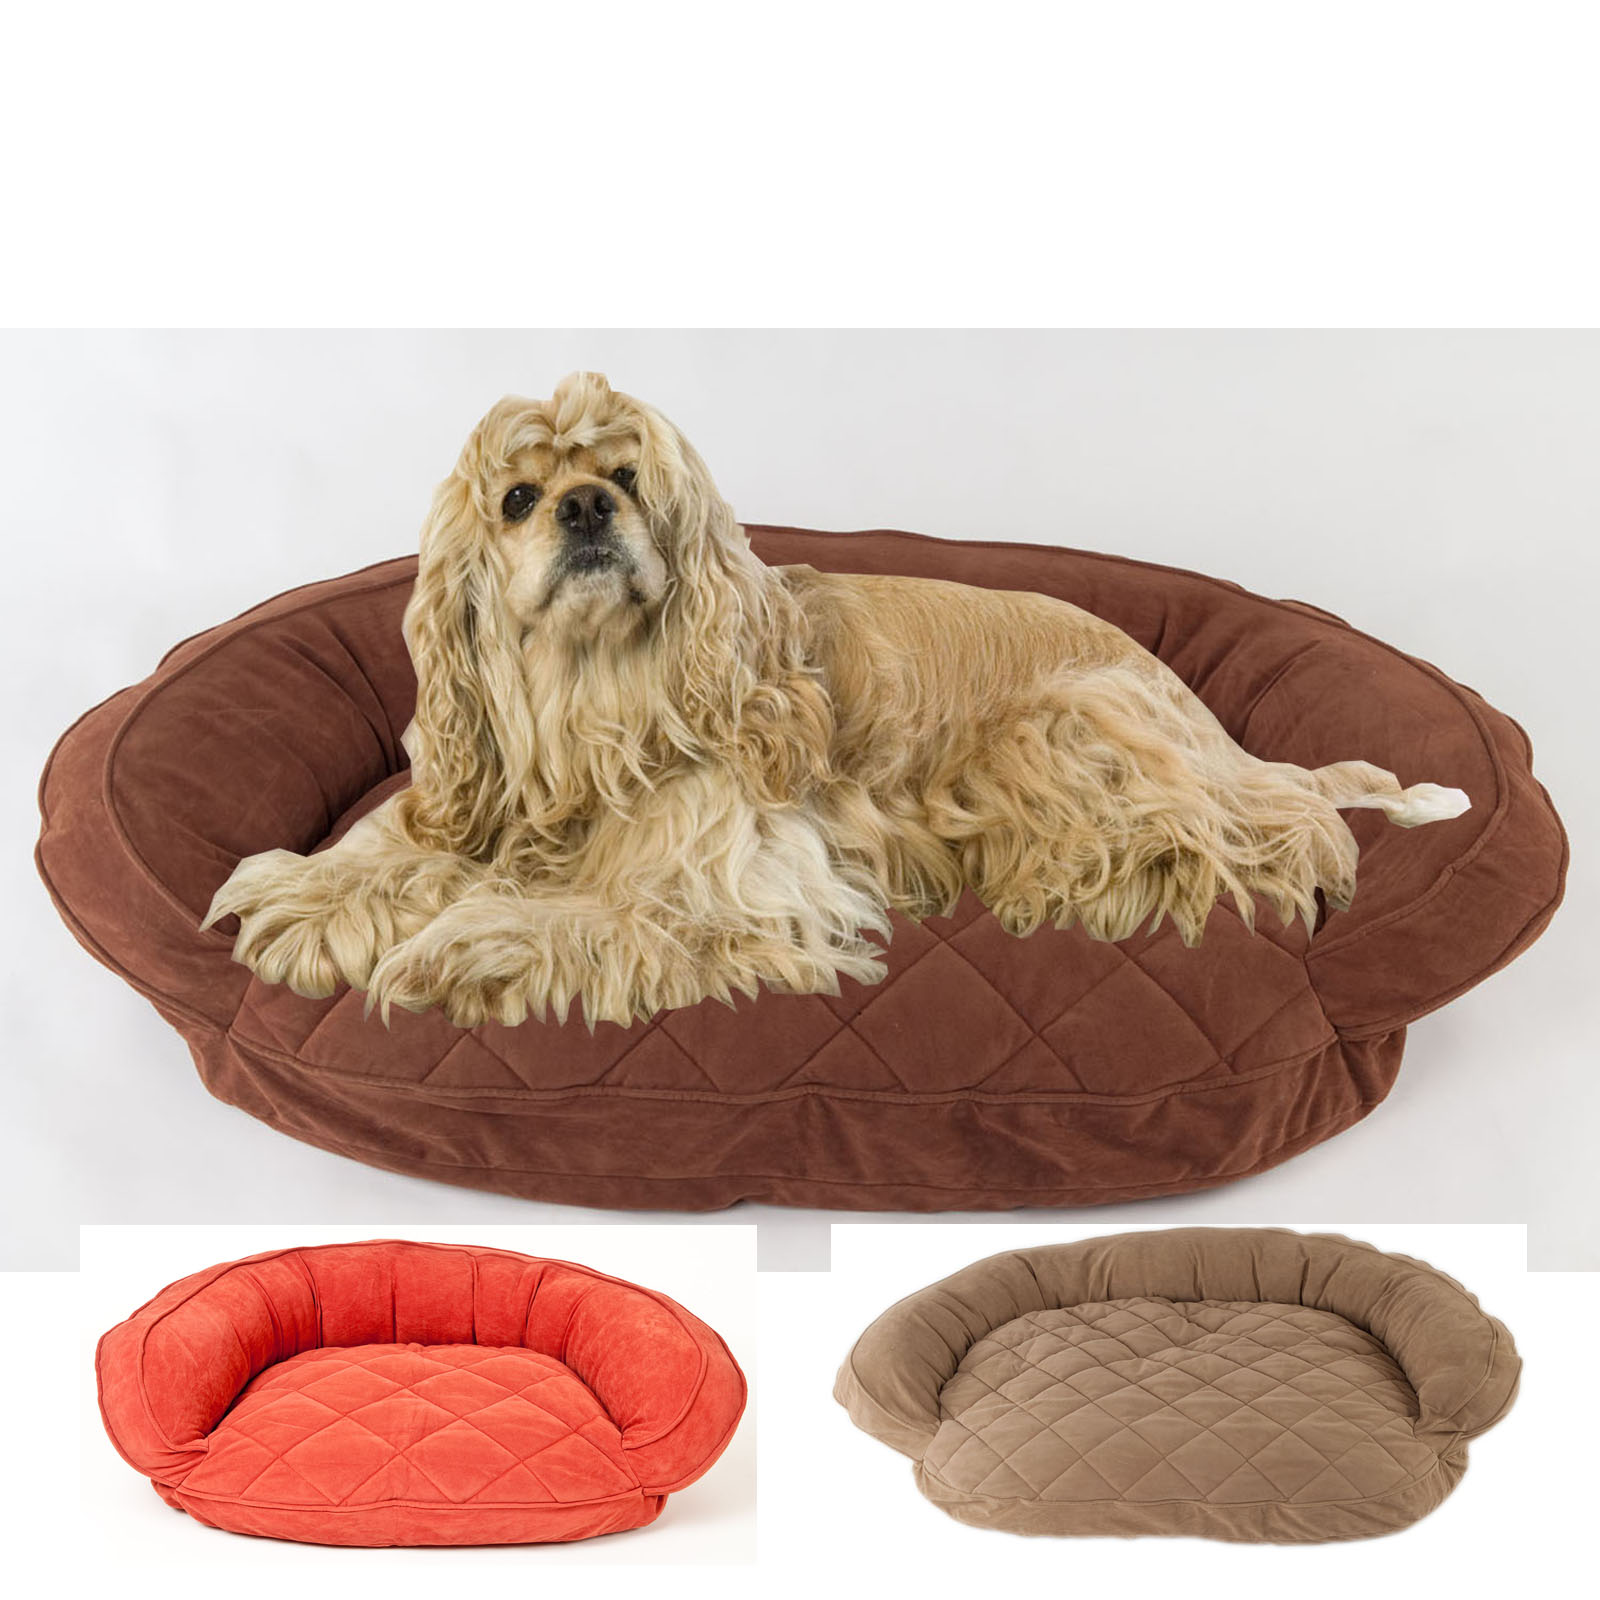 Carolina Pet Company Small Microfiber Quilted Bolster Bed with Moister Barrier